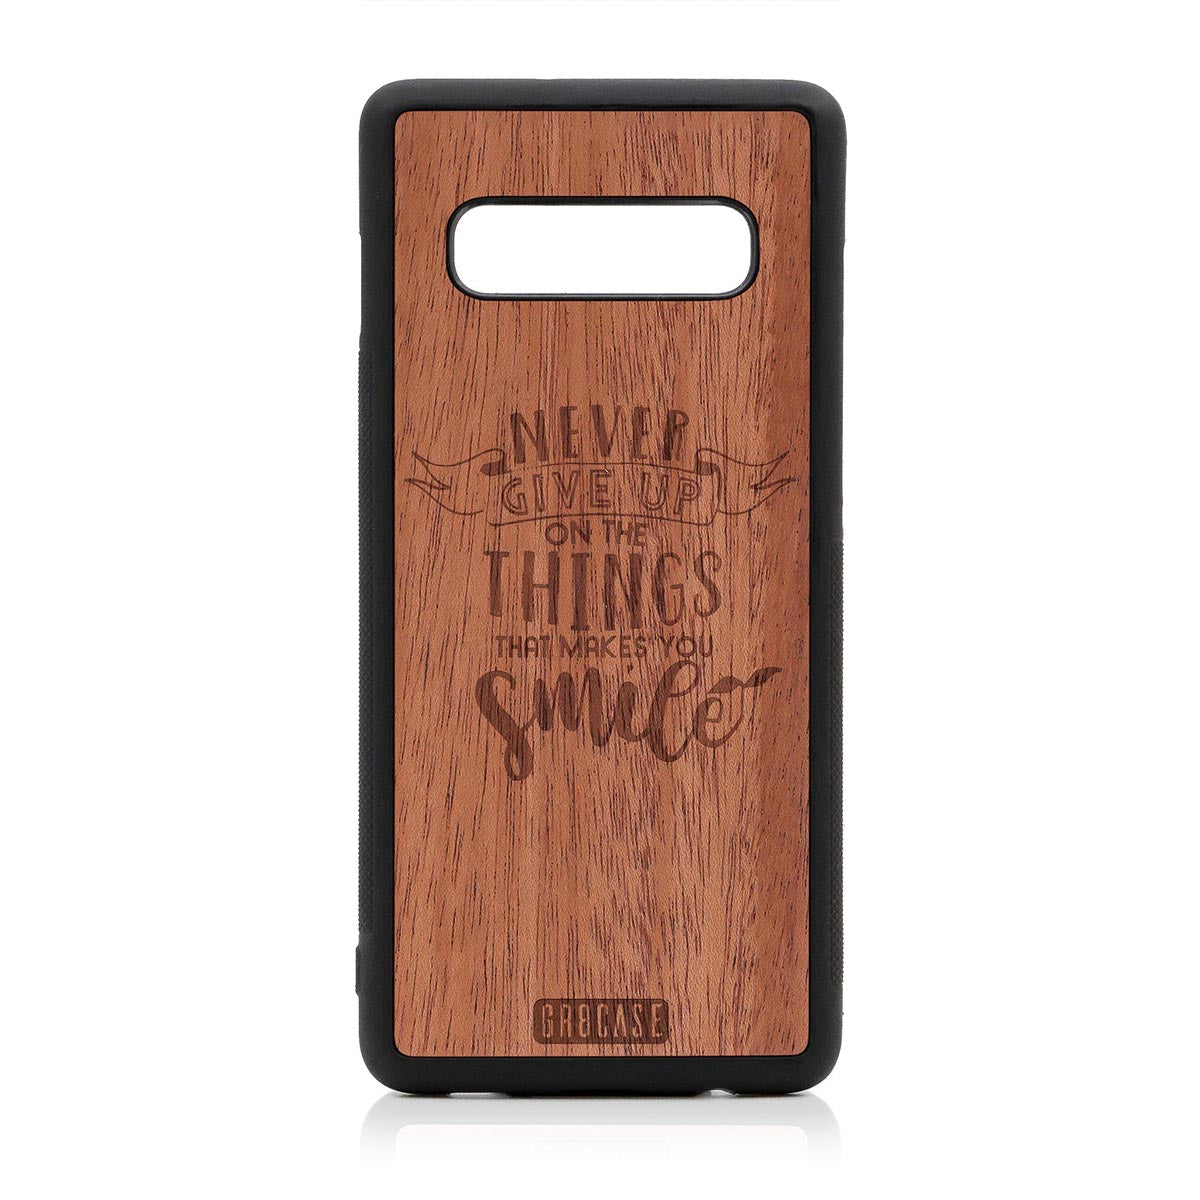 Never Give Up On The Things That Makes You Smile Design Wood Case Samsung Galaxy S10 Plus by GR8CASE